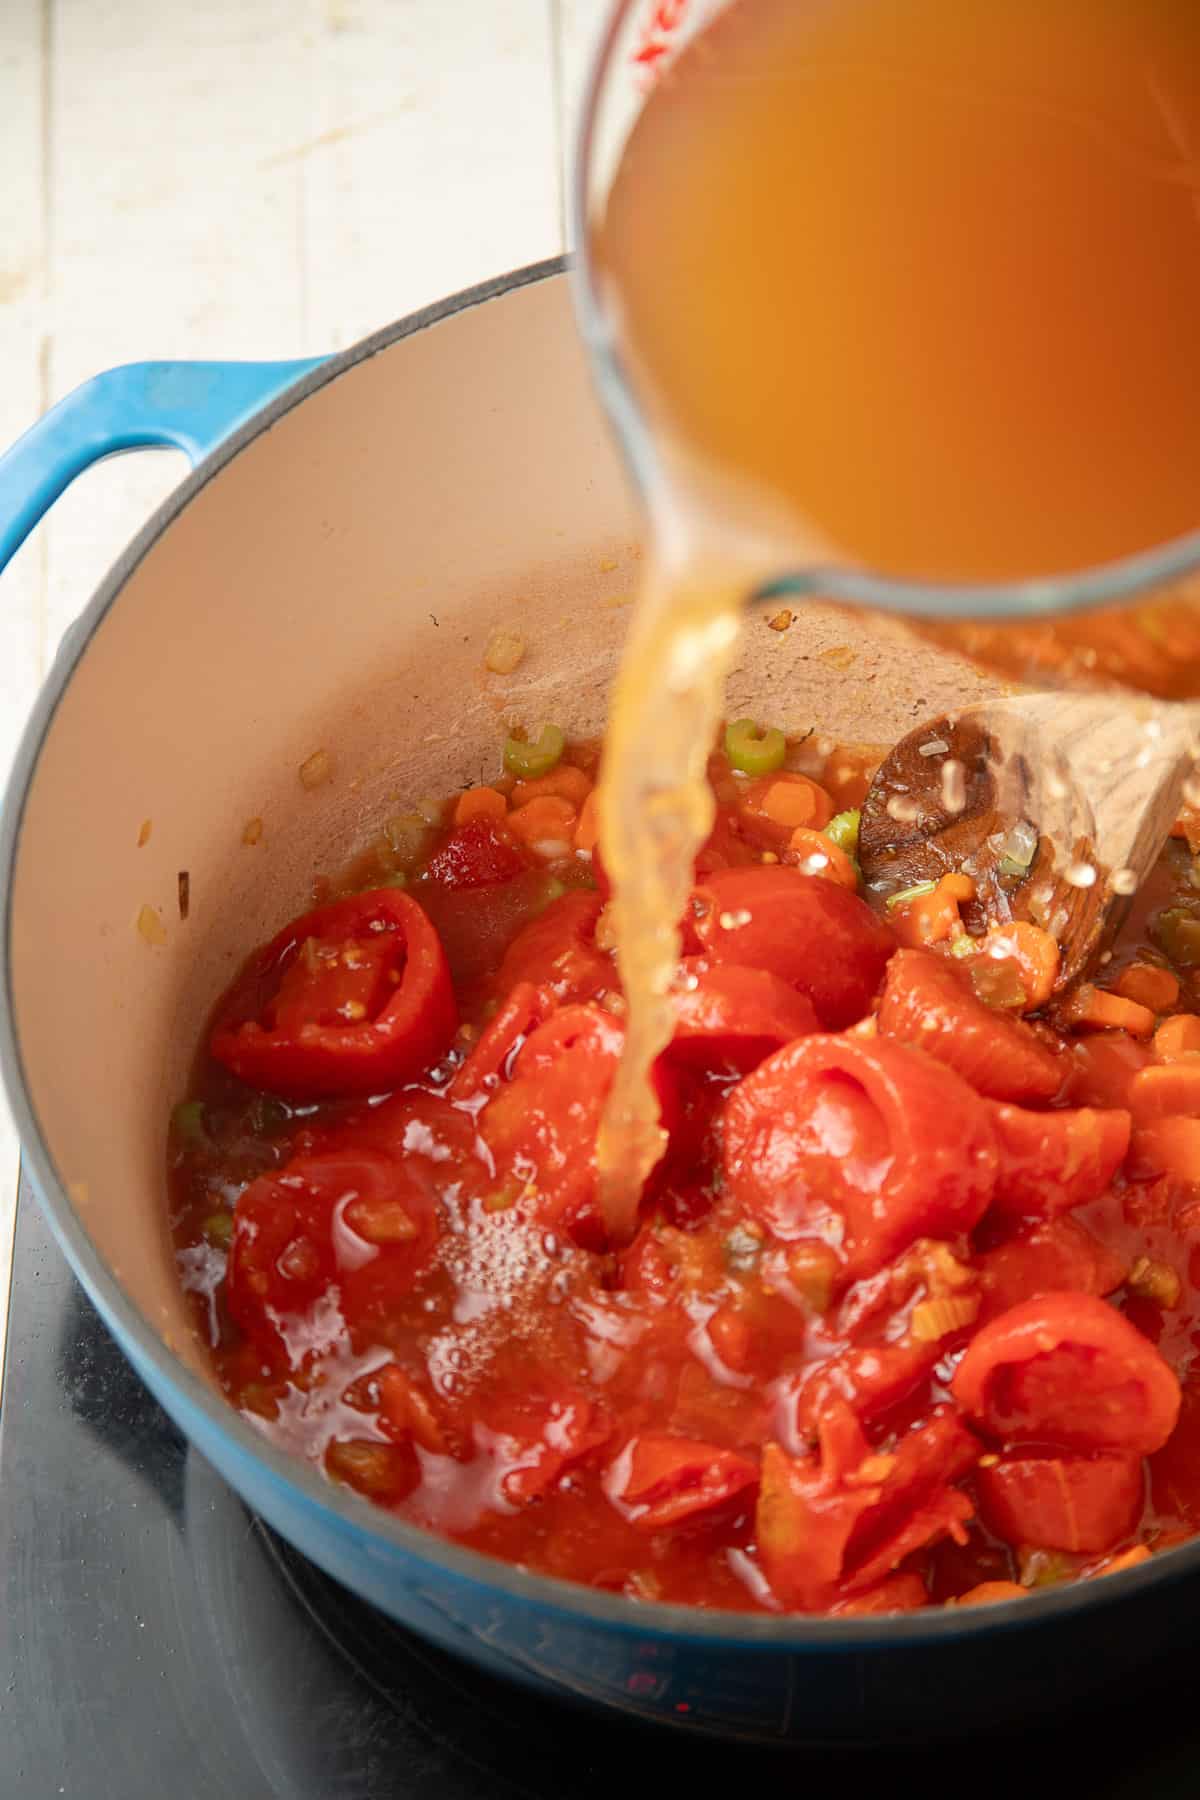 Broth being pouted into a pot containing tomatoes and vegetables.